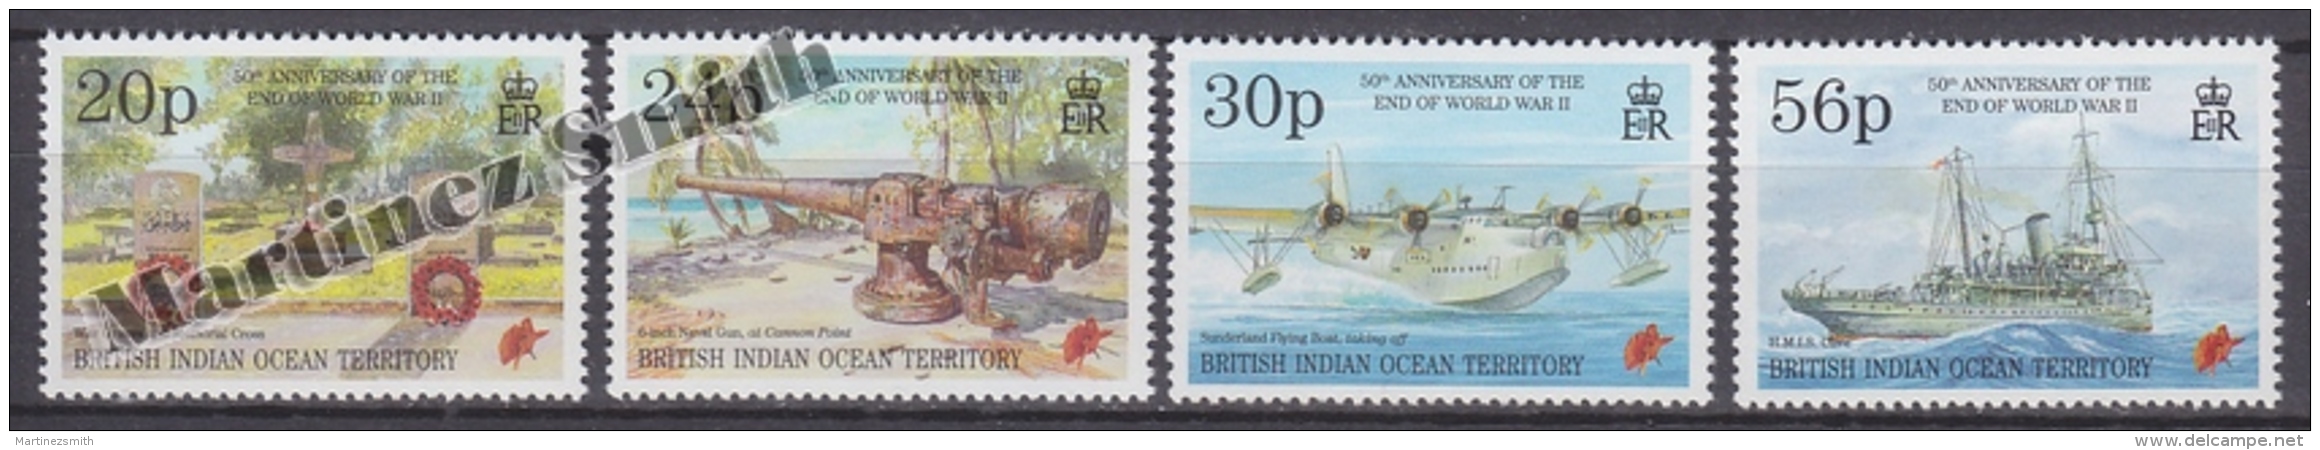 British Indian Ocean 1995 Yvert 165- 168, 50th Anniversary Of The End Of World War II - MNH - Territorio Britannico Dell'Oceano Indiano